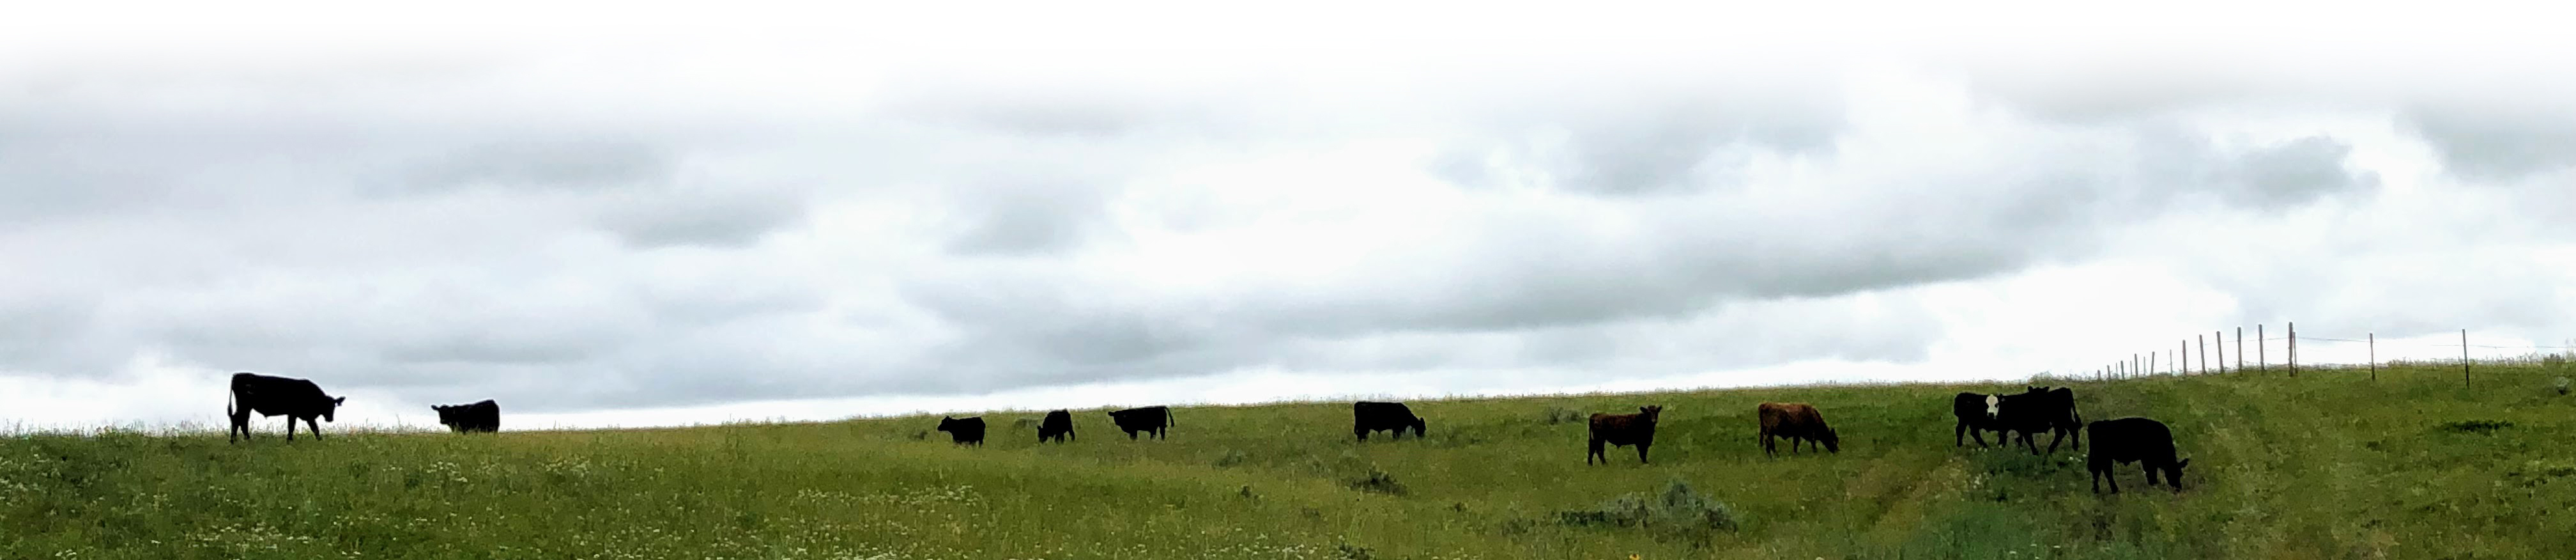 cattle in field under overcast skies